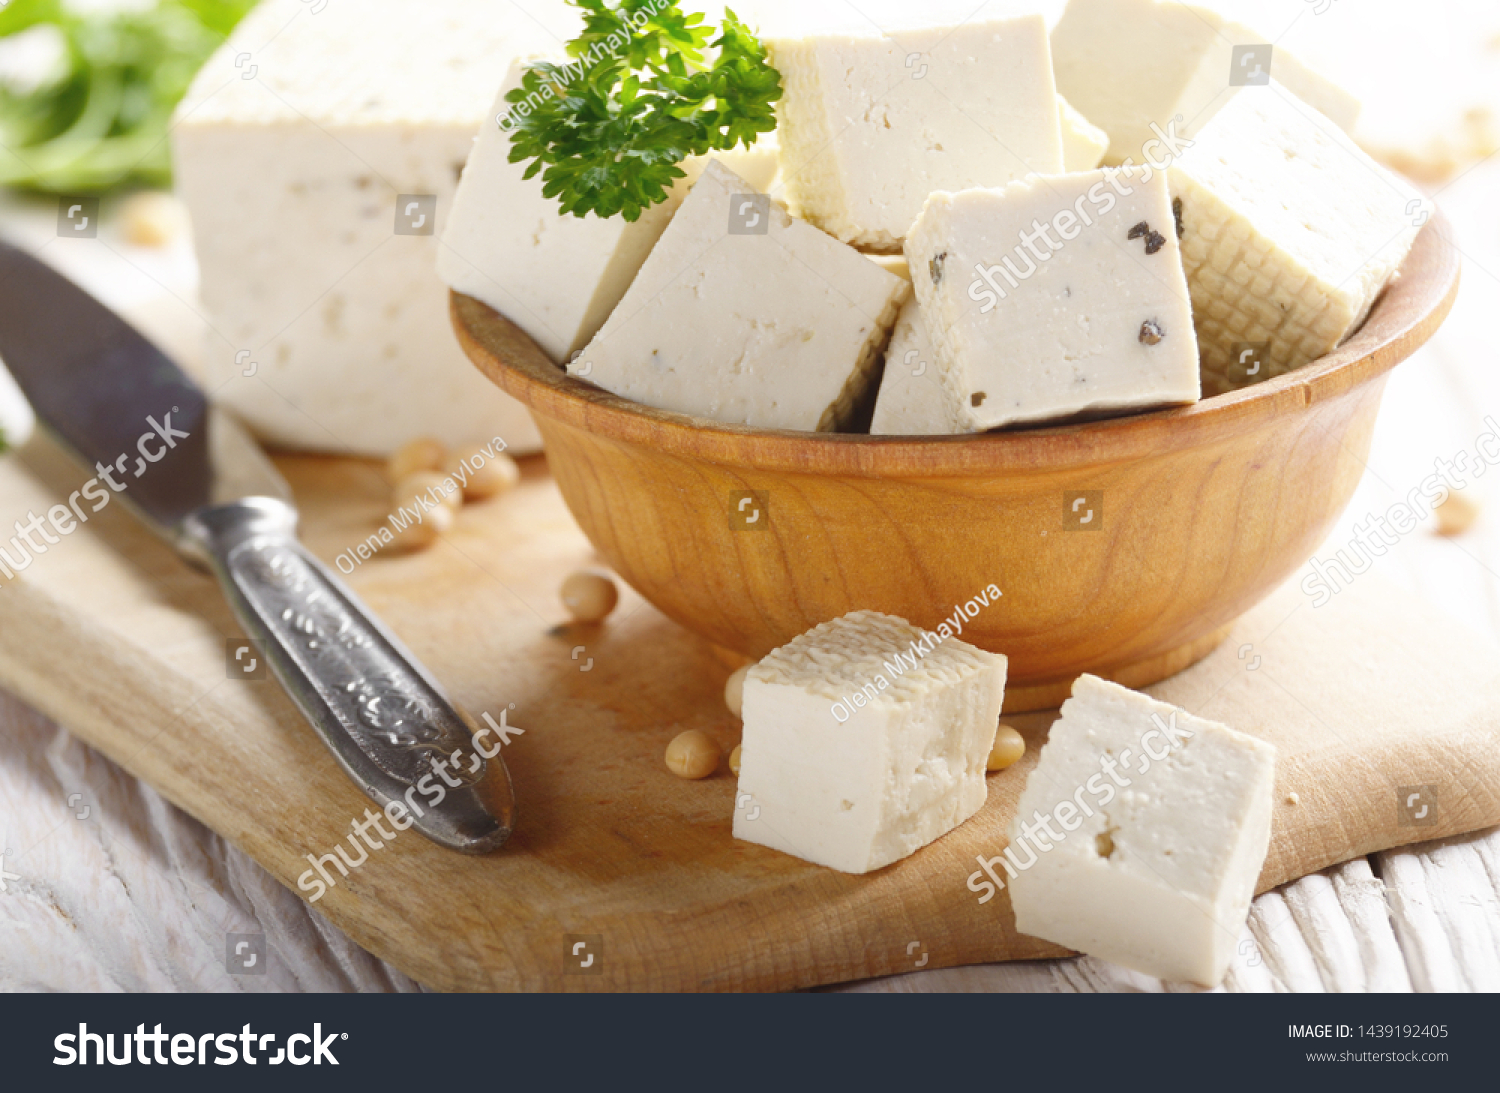 Soy Bean Curd Tofu Wooden Bowl Stock Photo Edit Now 1439192405,Painting Baseboards With Carpet